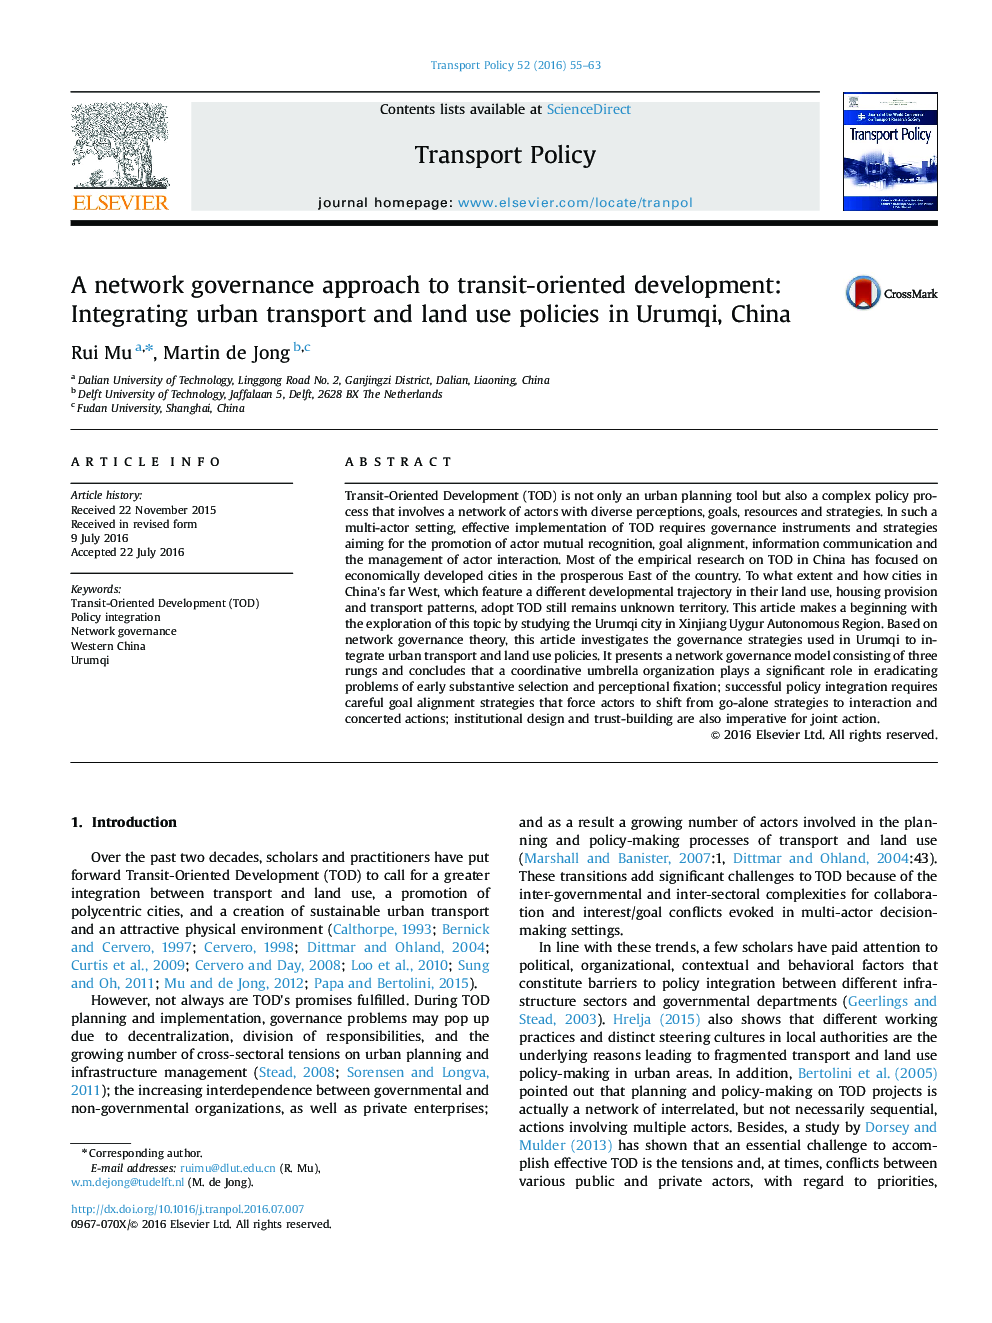 A network governance approach to transit-oriented development: Integrating urban transport and land use policies in Urumqi, China